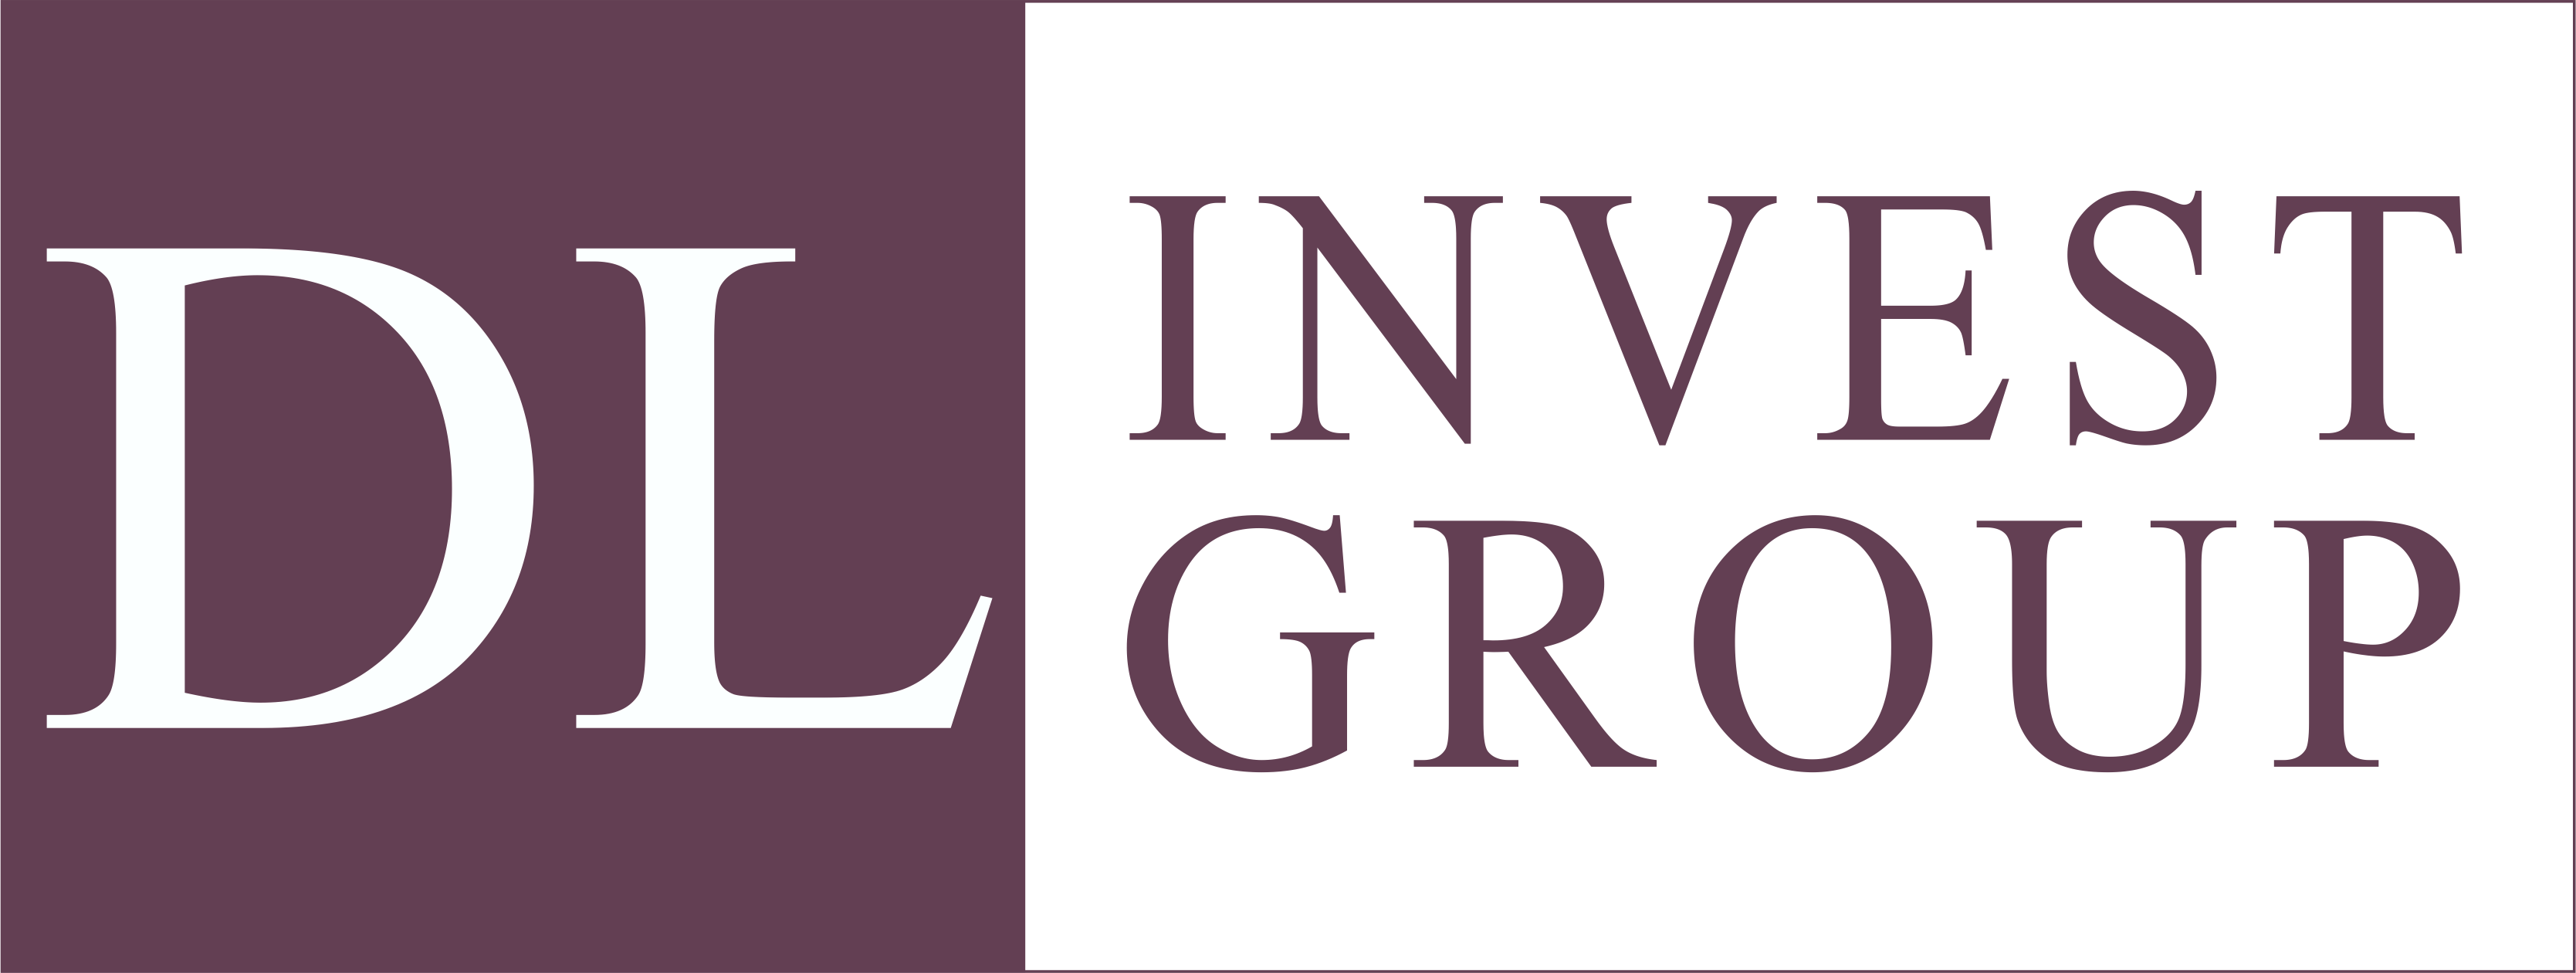 DL INVEST GROUP